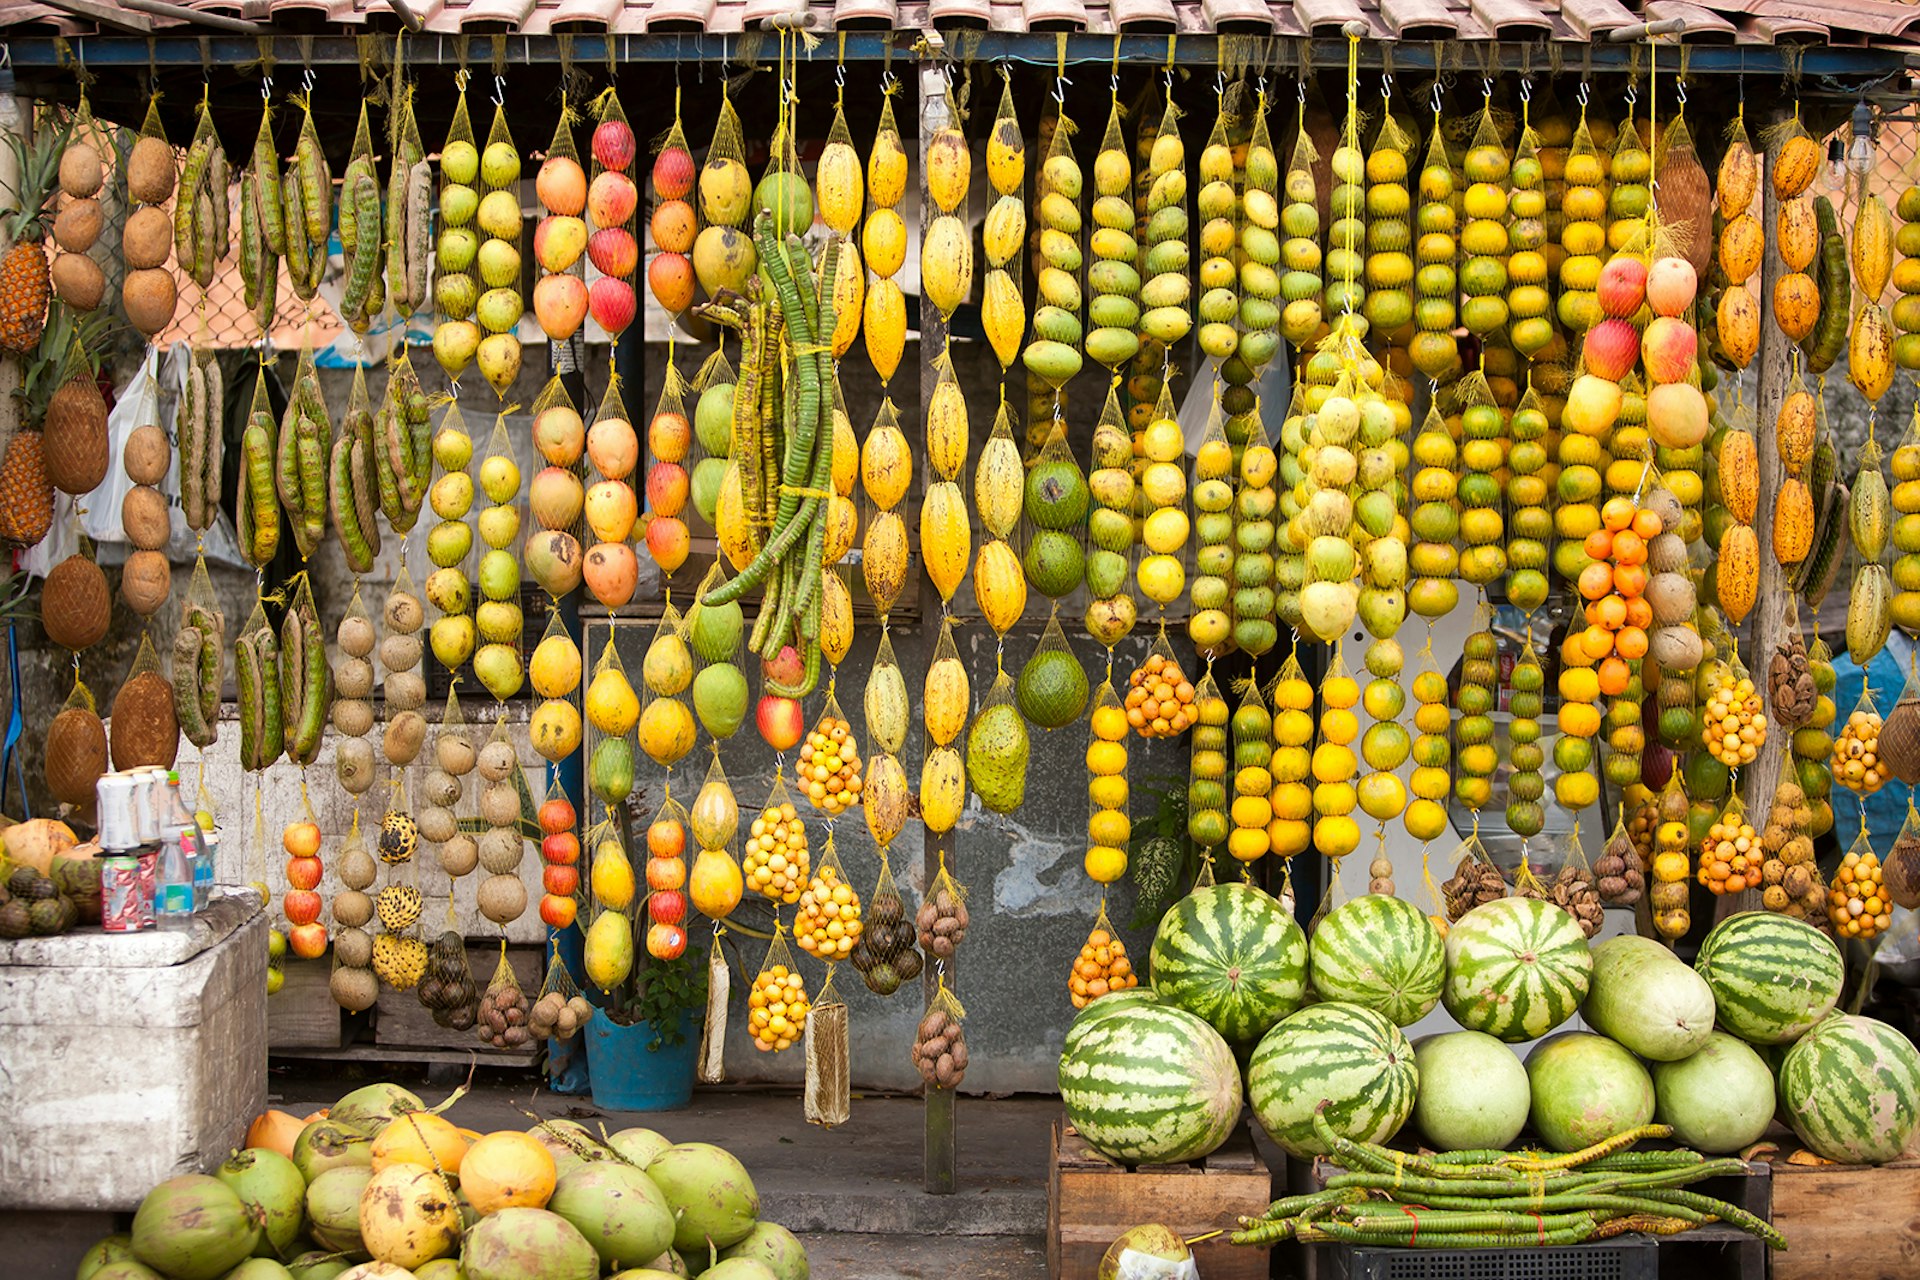 Green, yellow and red fruits hang from the roof of a roadside market in the Amazon. South America.